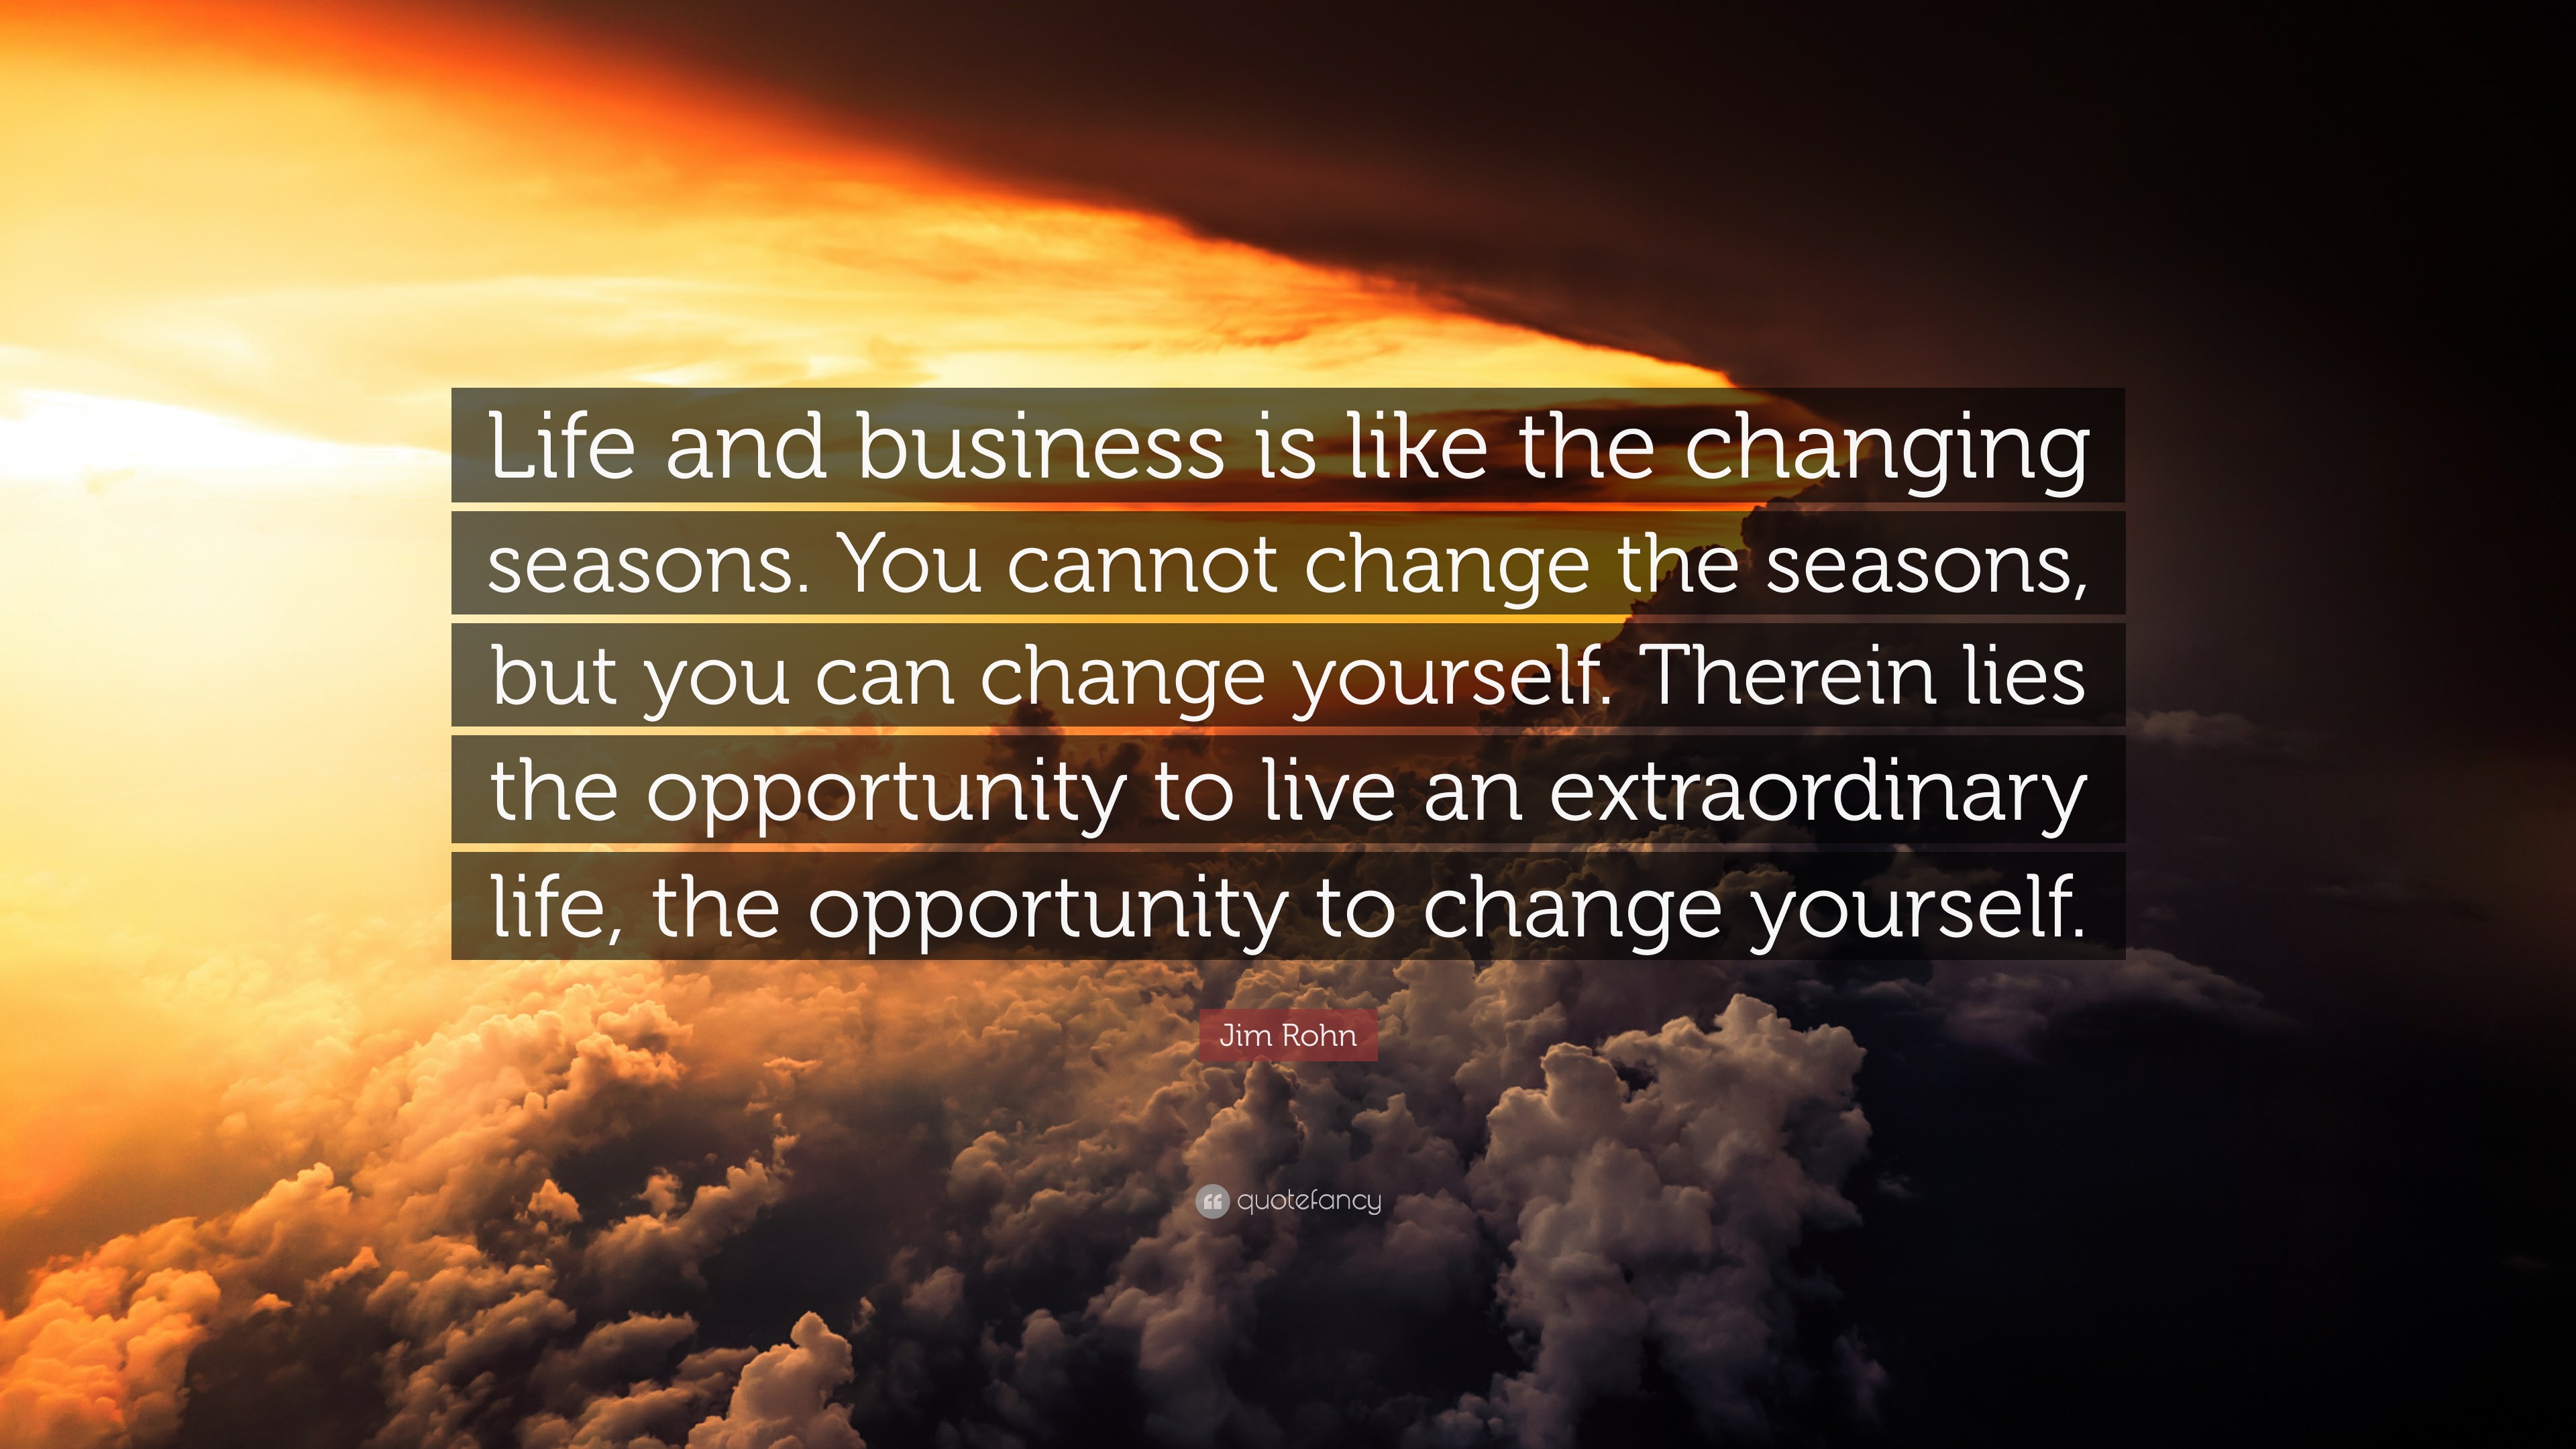 Jim Rohn Quote “Life and business is like the changing seasons You cannot